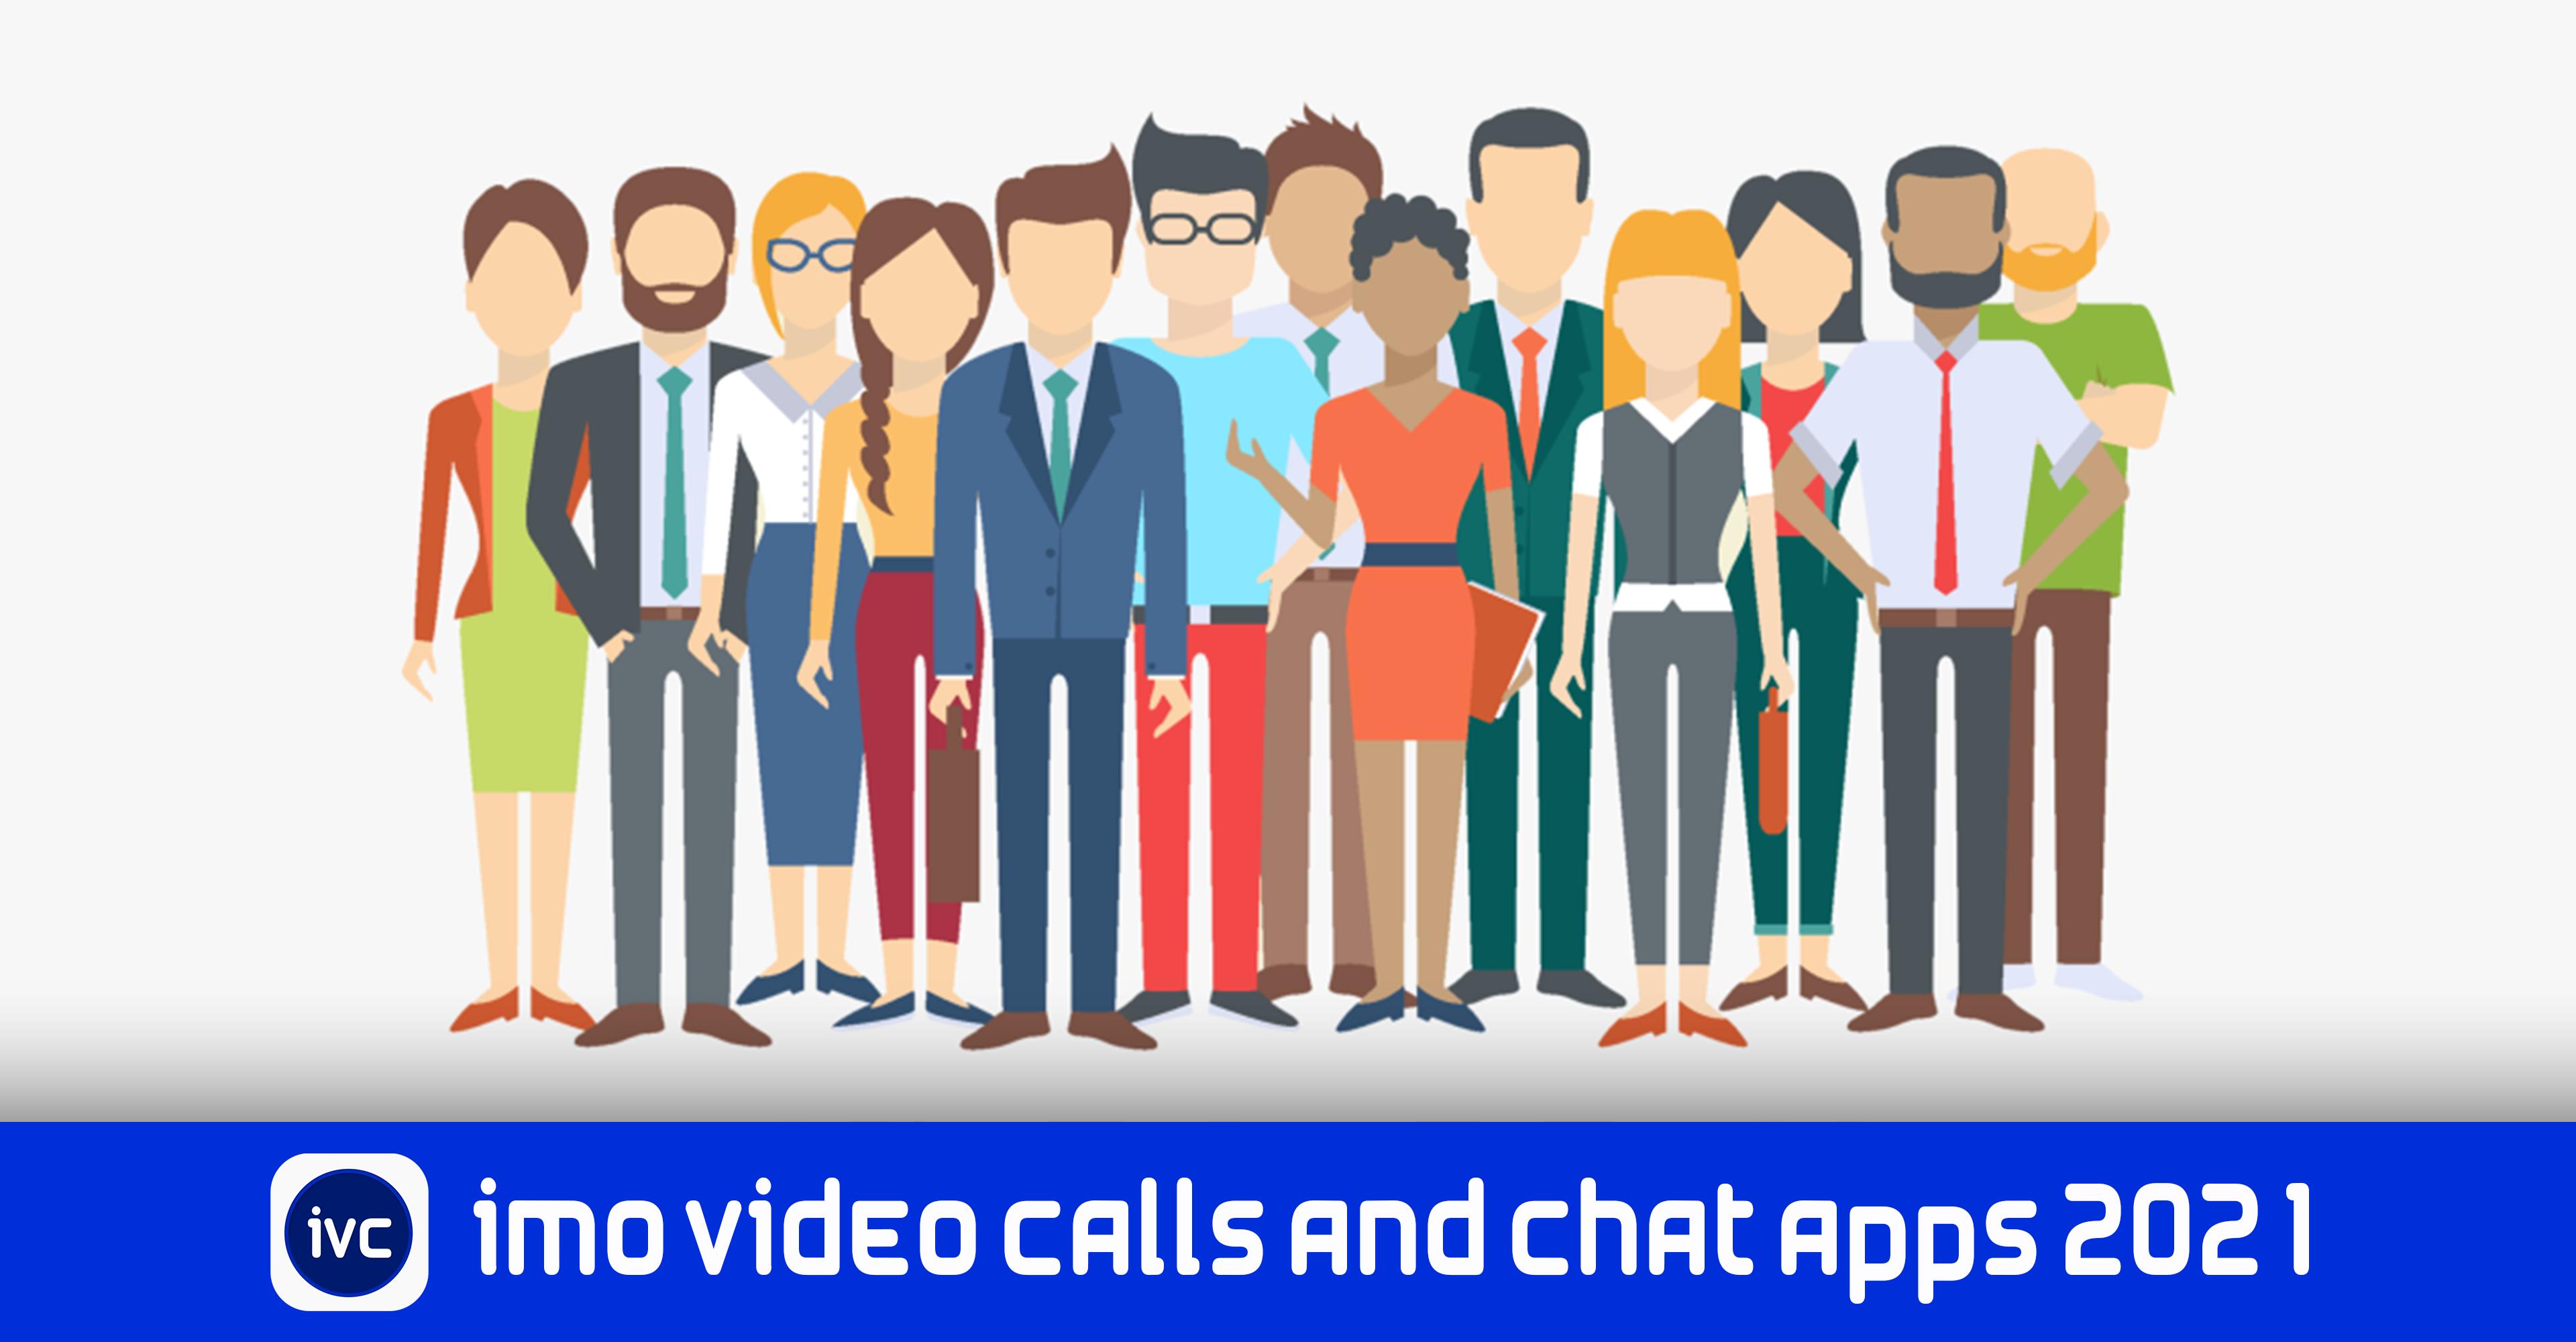 imo video calls and chat apps 2021 1.1.1.1 Screenshot 1